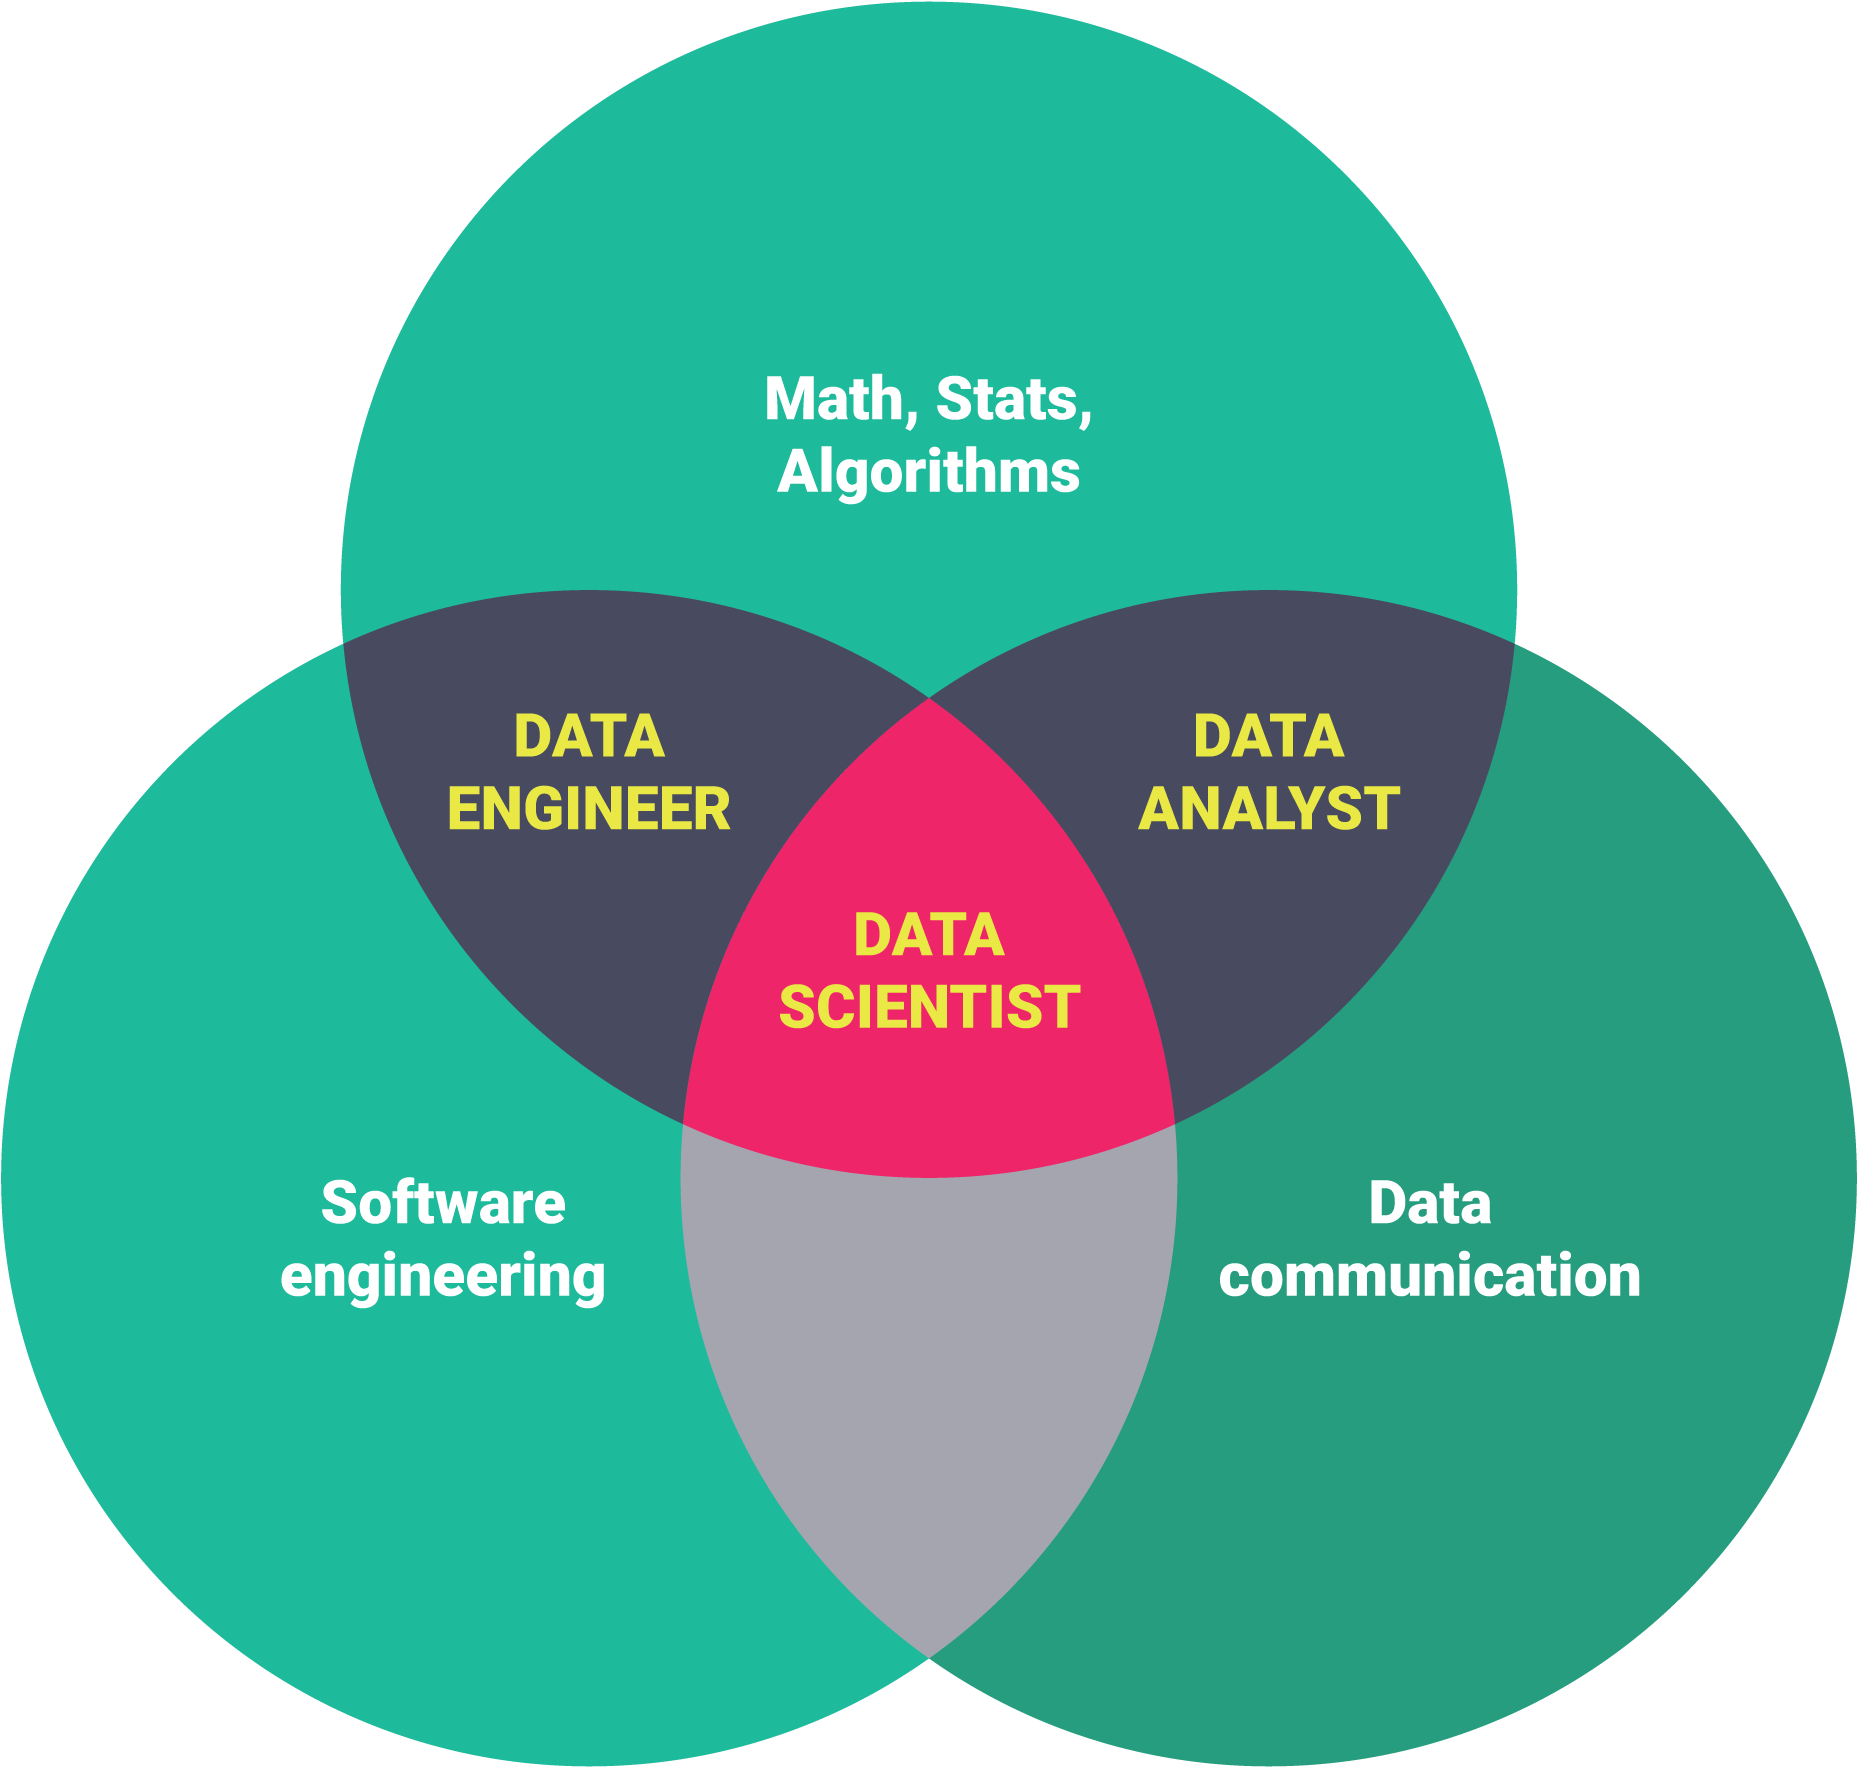 Marvelous Data Warehouse Career Path J65 About Remodel - Data Analyst Data Scientist (2000x2000)